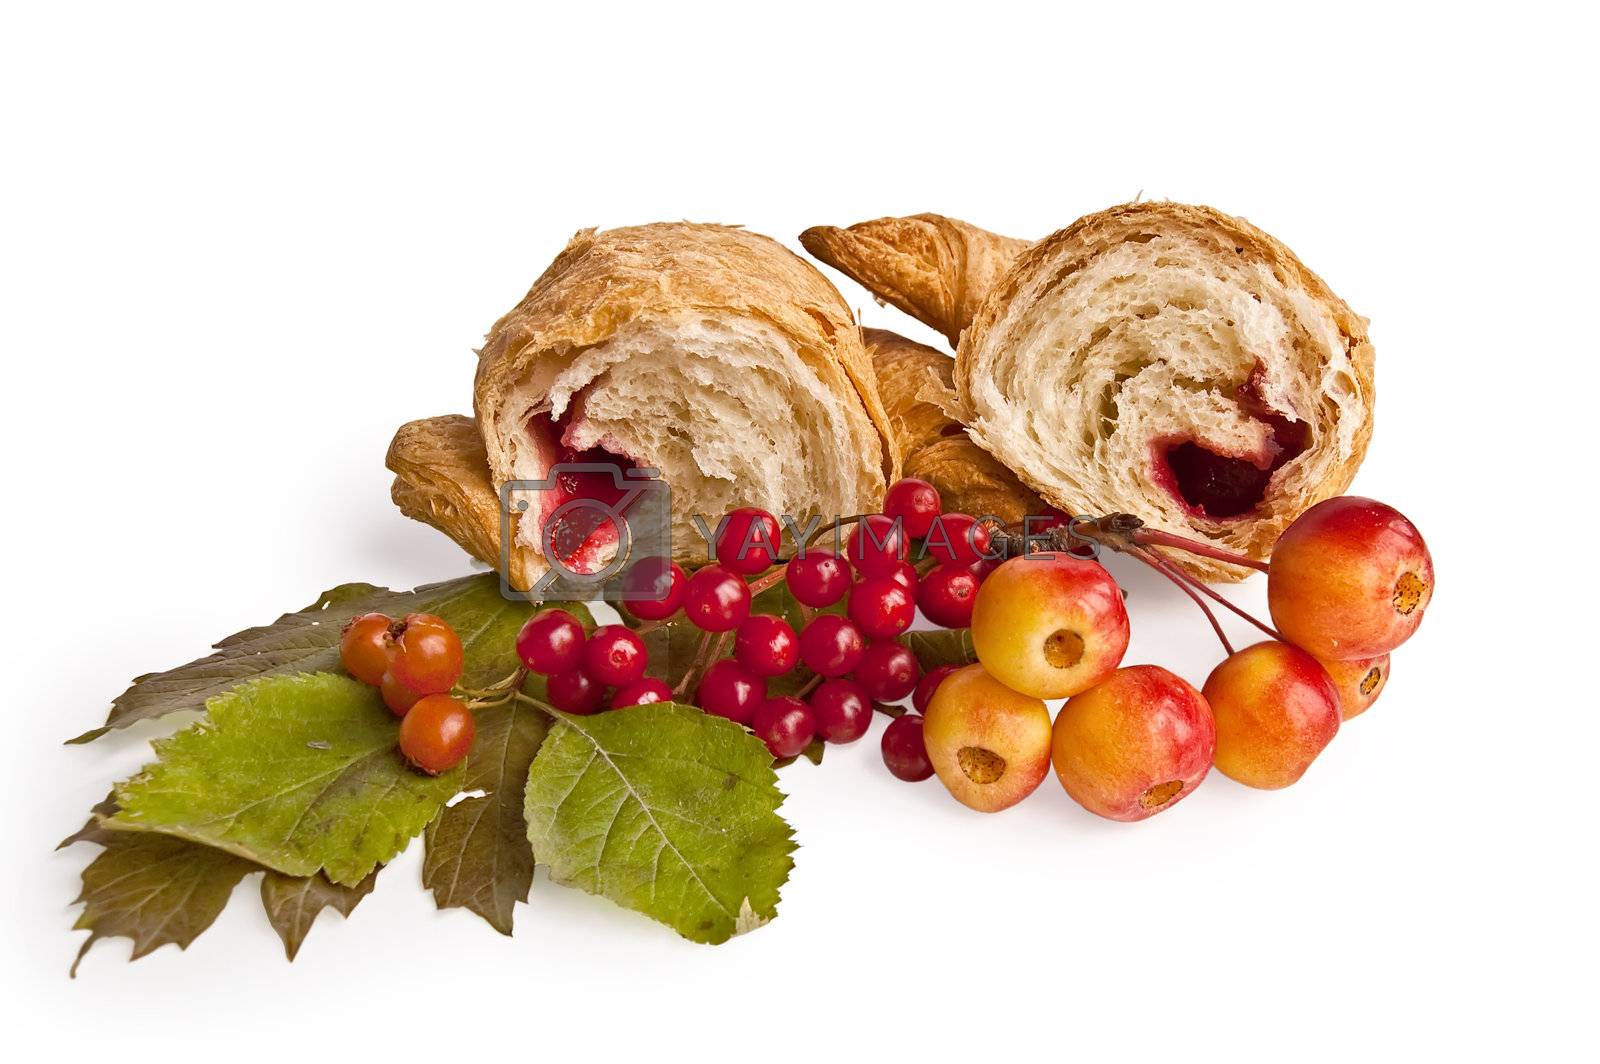 Royalty free image of Croissant with berries and apples by rezkrr